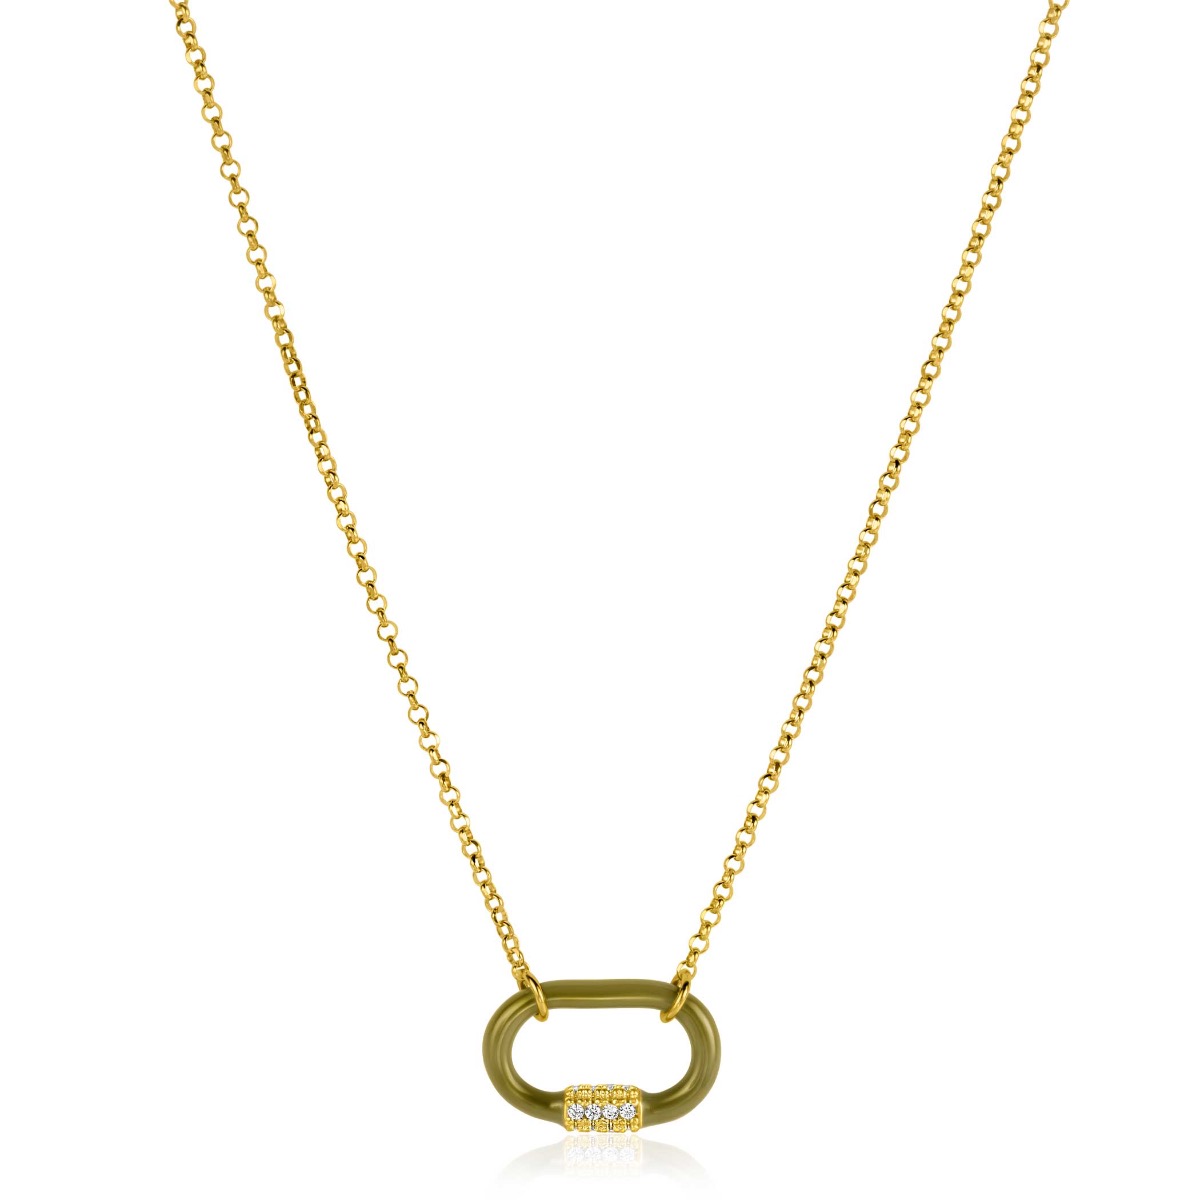 ZINZI Gold Plated Silver Chain Necklace 45cm Oval Pendant Olive Green Enamel And White Zirconias ZIC2374